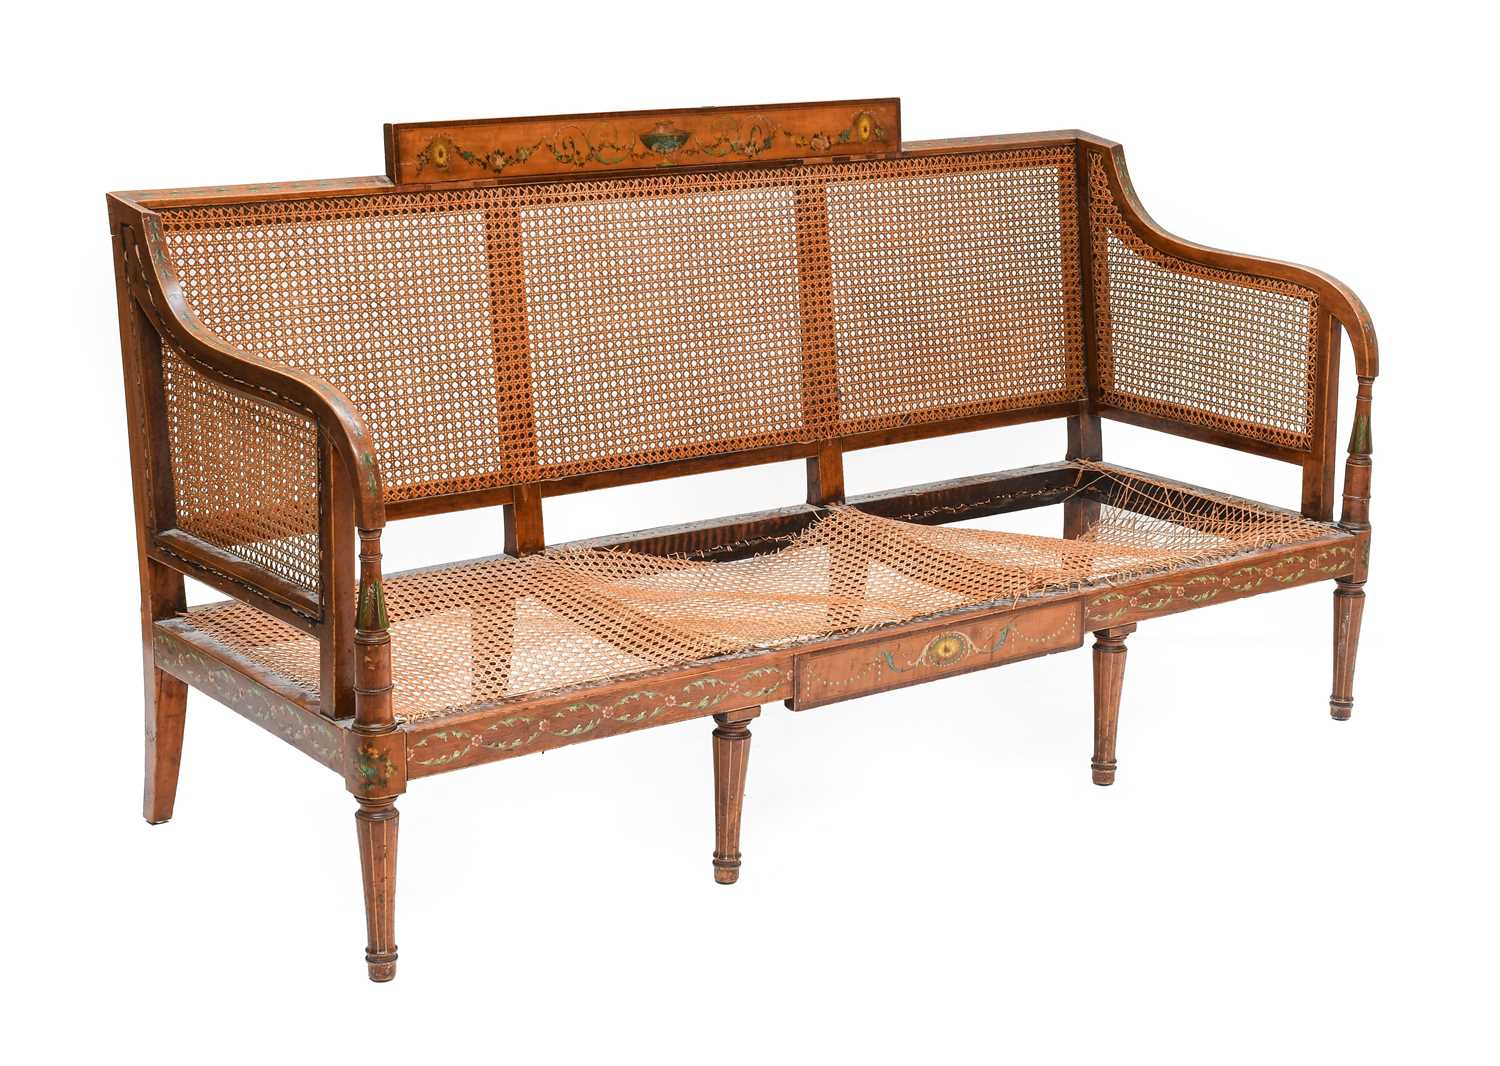 A George III Satinwood, Rosewood-Crossbanded and Polychrome-Painted Single-Cane-Seated Three-